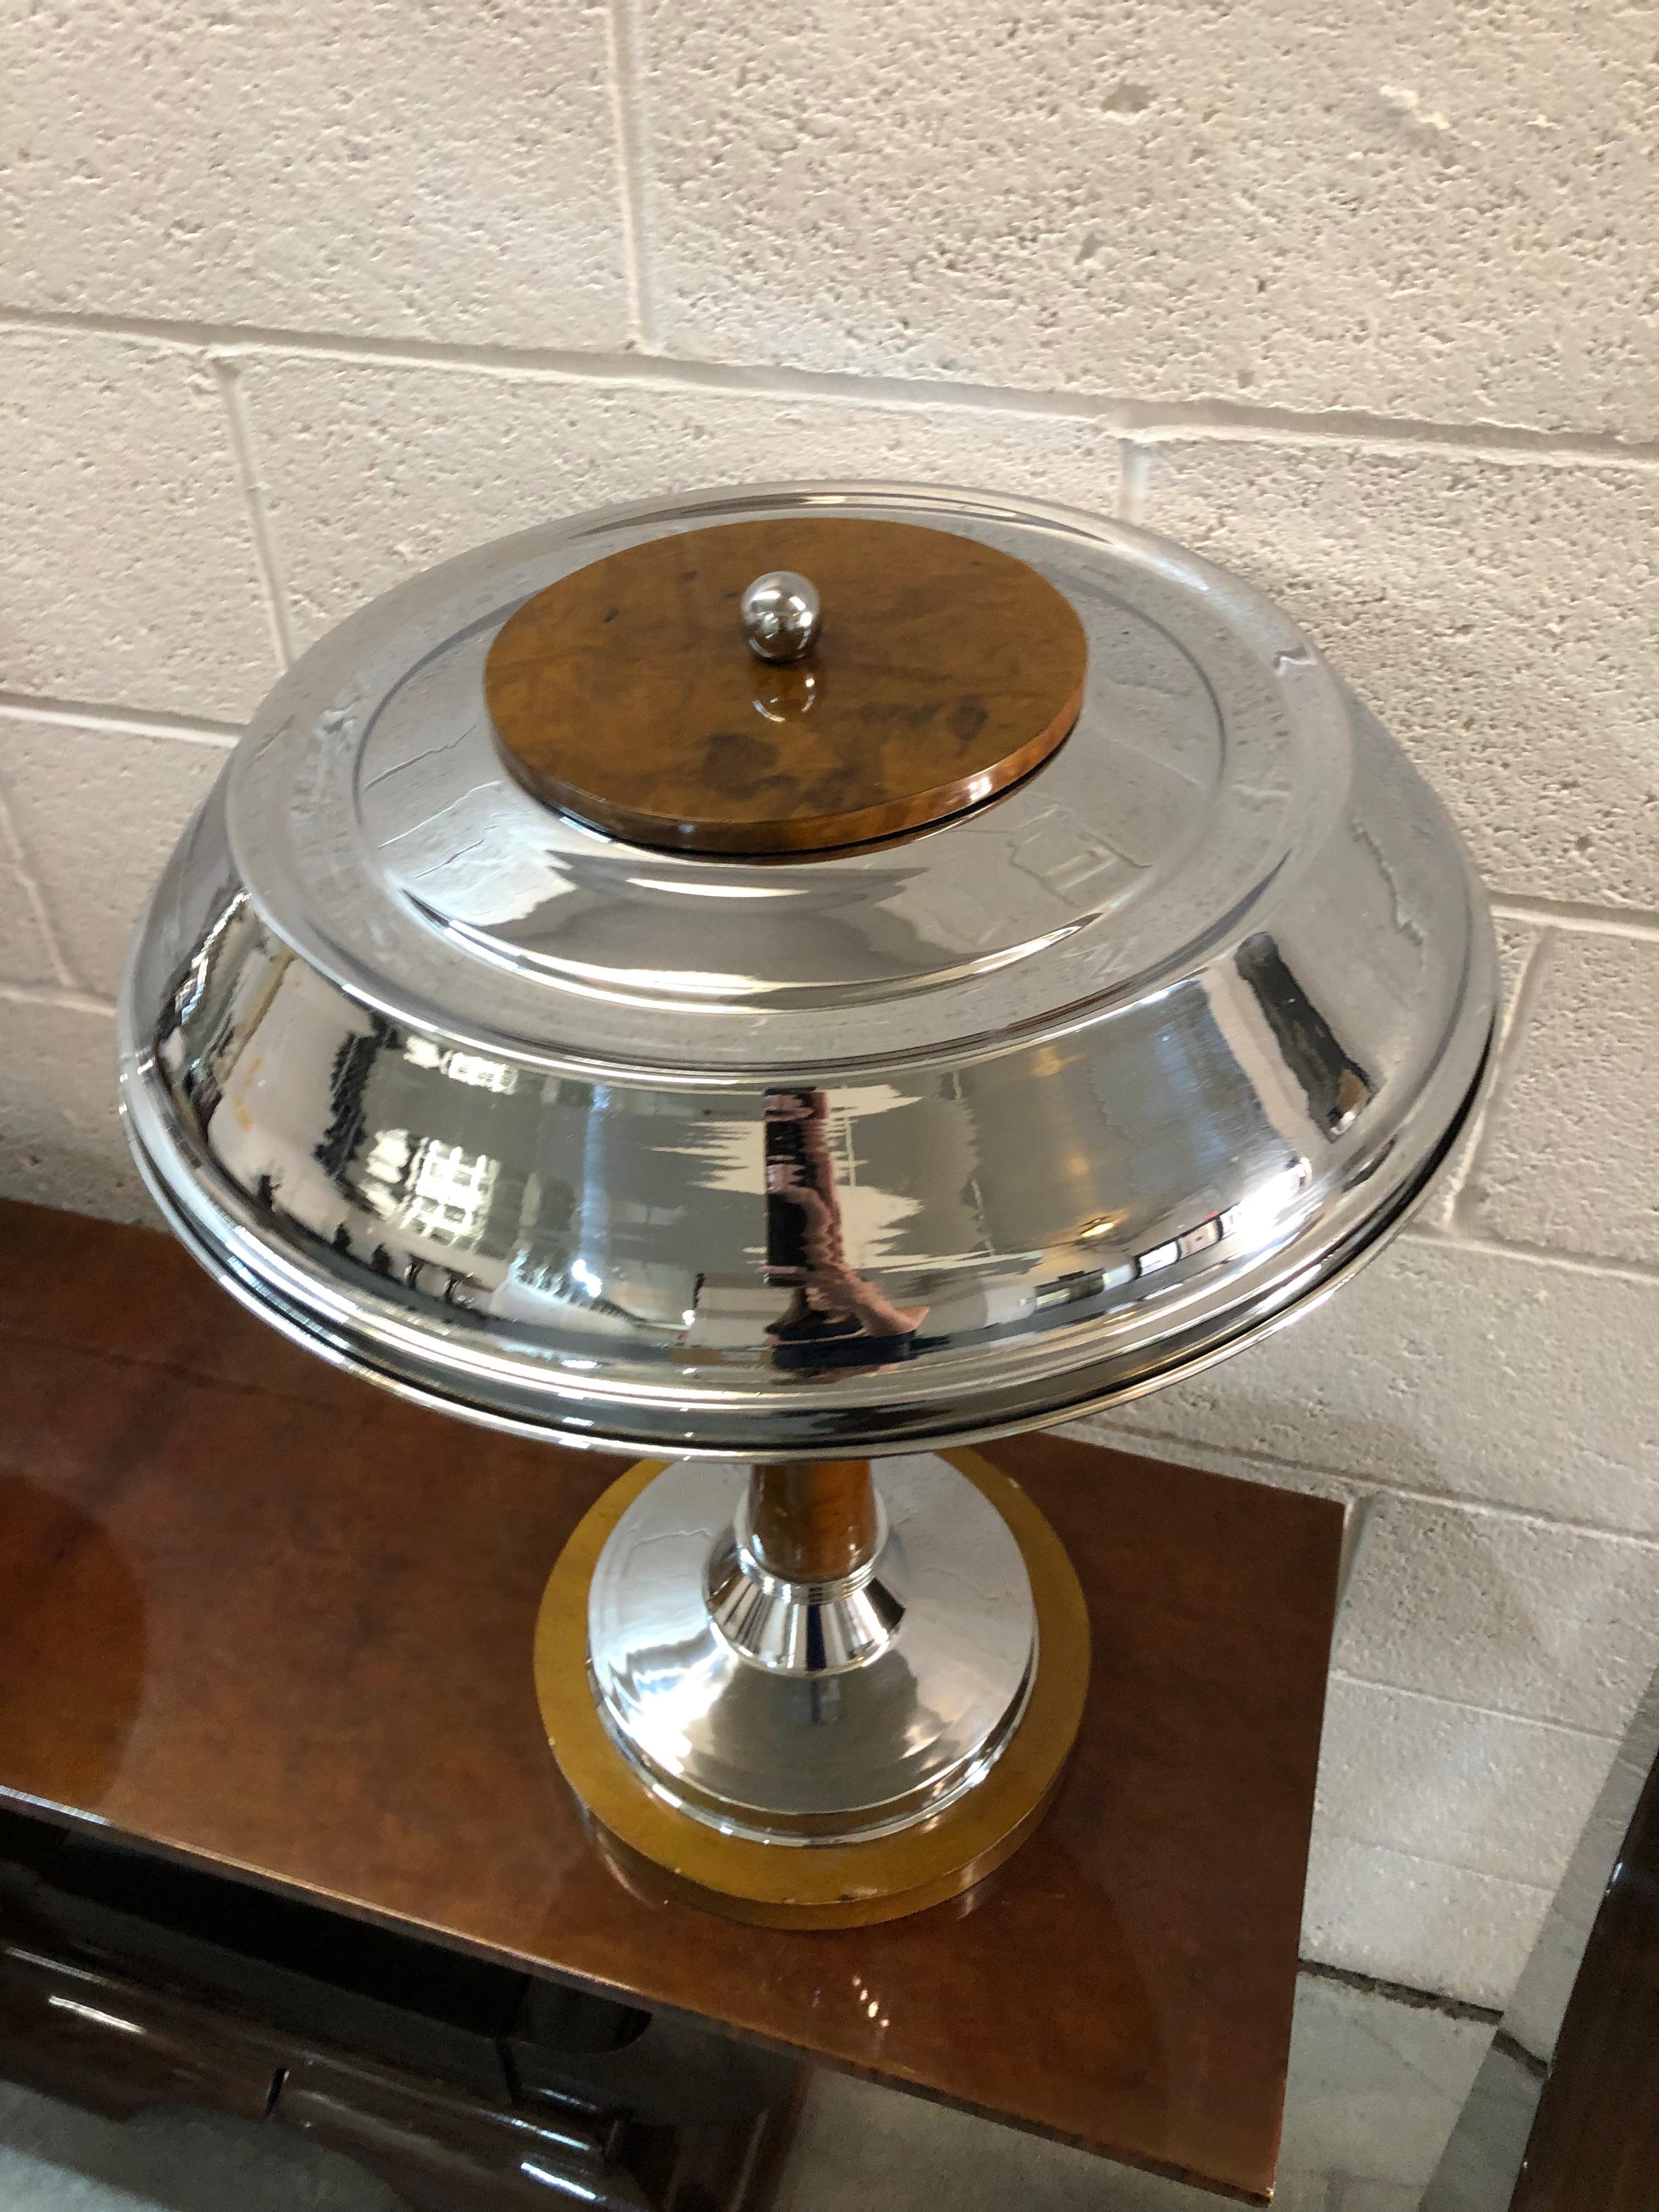 Pair of Art Deco Table Lamps in wood and chrome, 1920, France For Sale 1